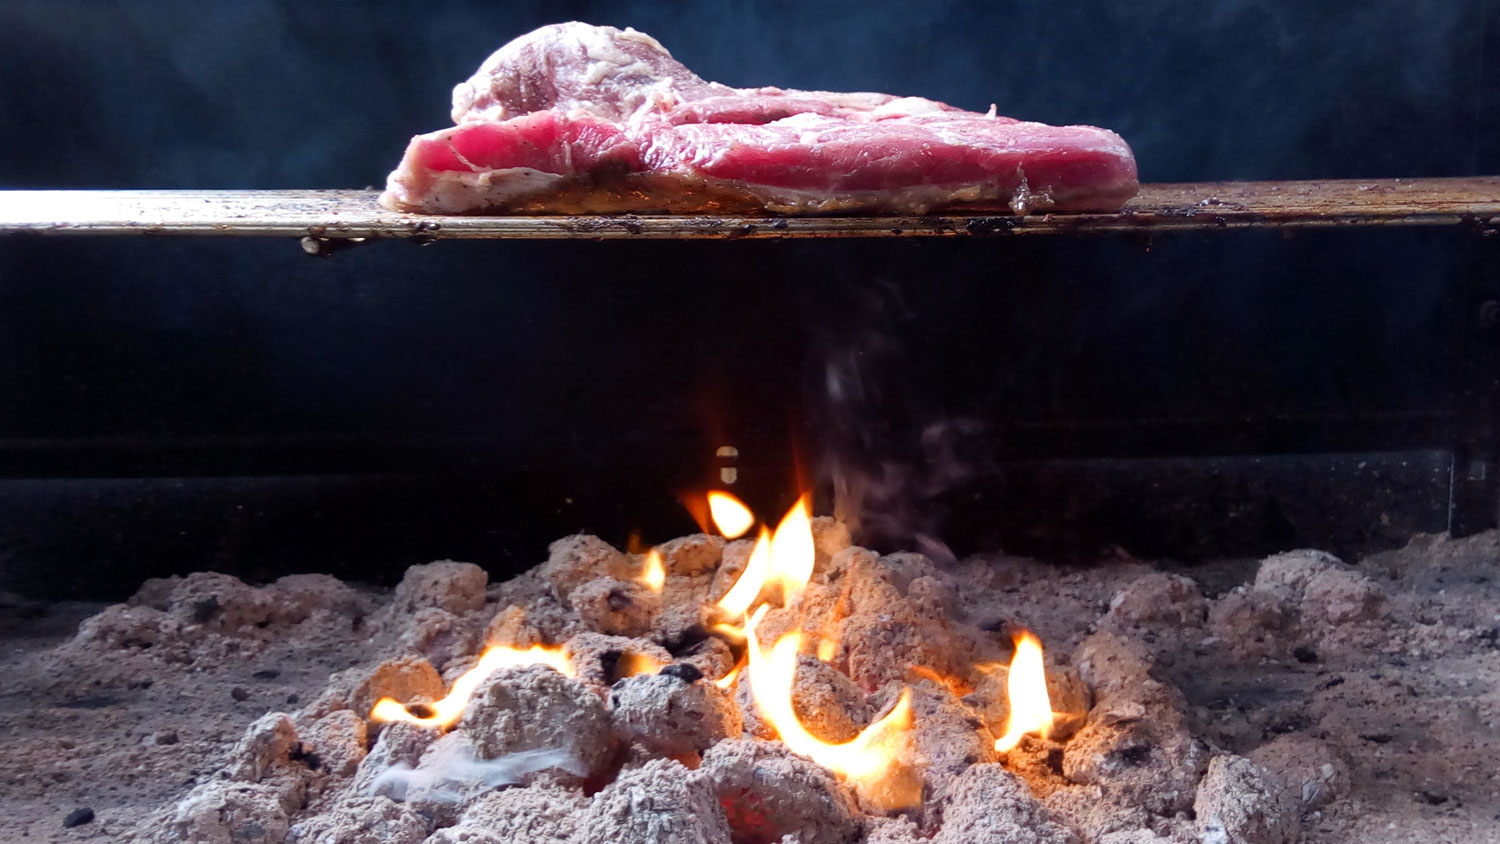 side view of a steak on a grill above hot coals